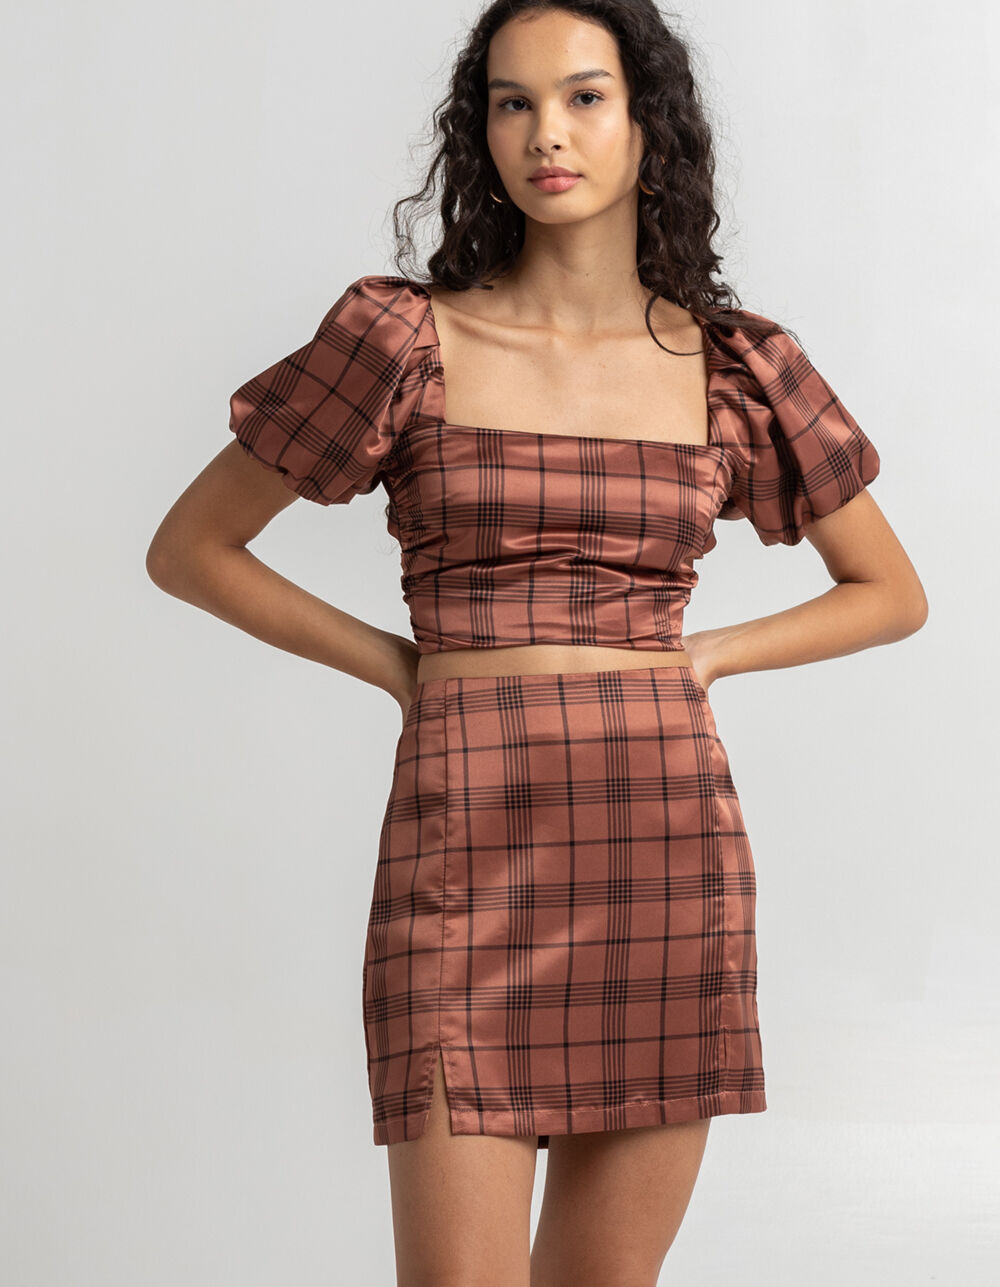 WEST OF MELROSE Mad About Plaid Mini Skirt - PLAID | Tillys